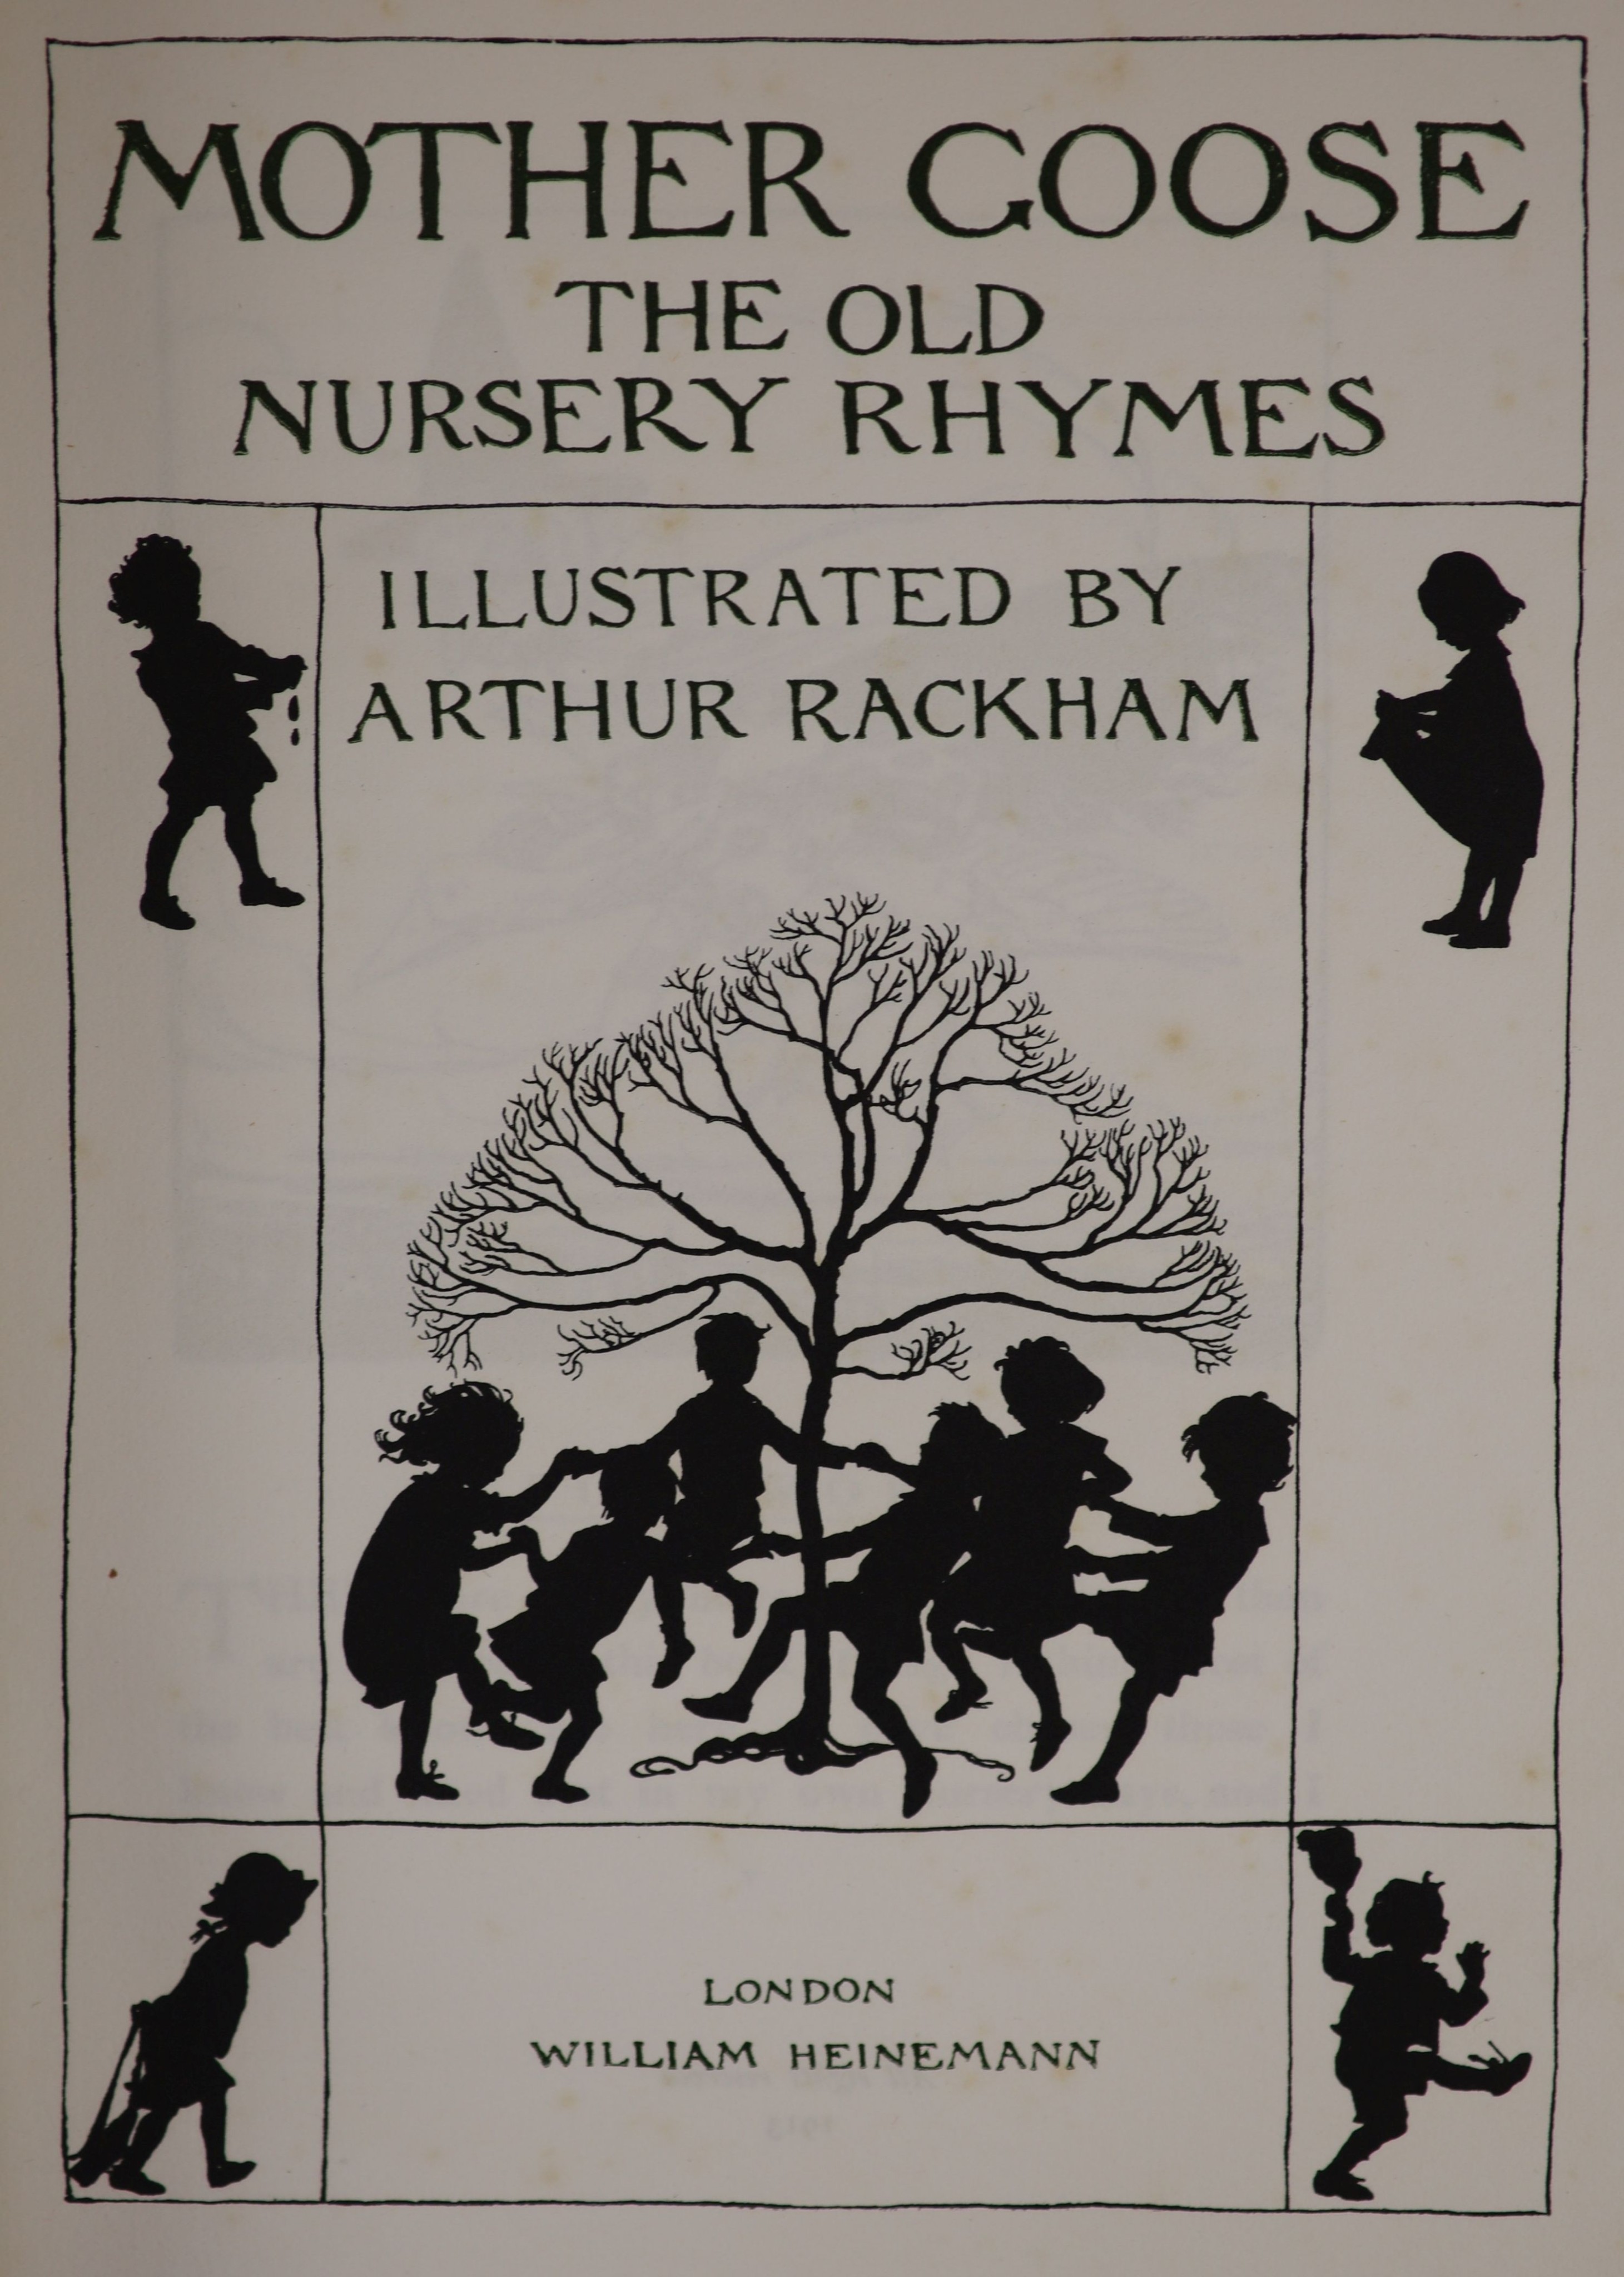 Rackham, Arthur - Mother Goose: The Old Nursery Rhymes, one of 1,130 signed by the author/illustrator, 4to, original gilt decorated cloth, with 13 tipped-in colour plates, William Heinemann, London, 1913